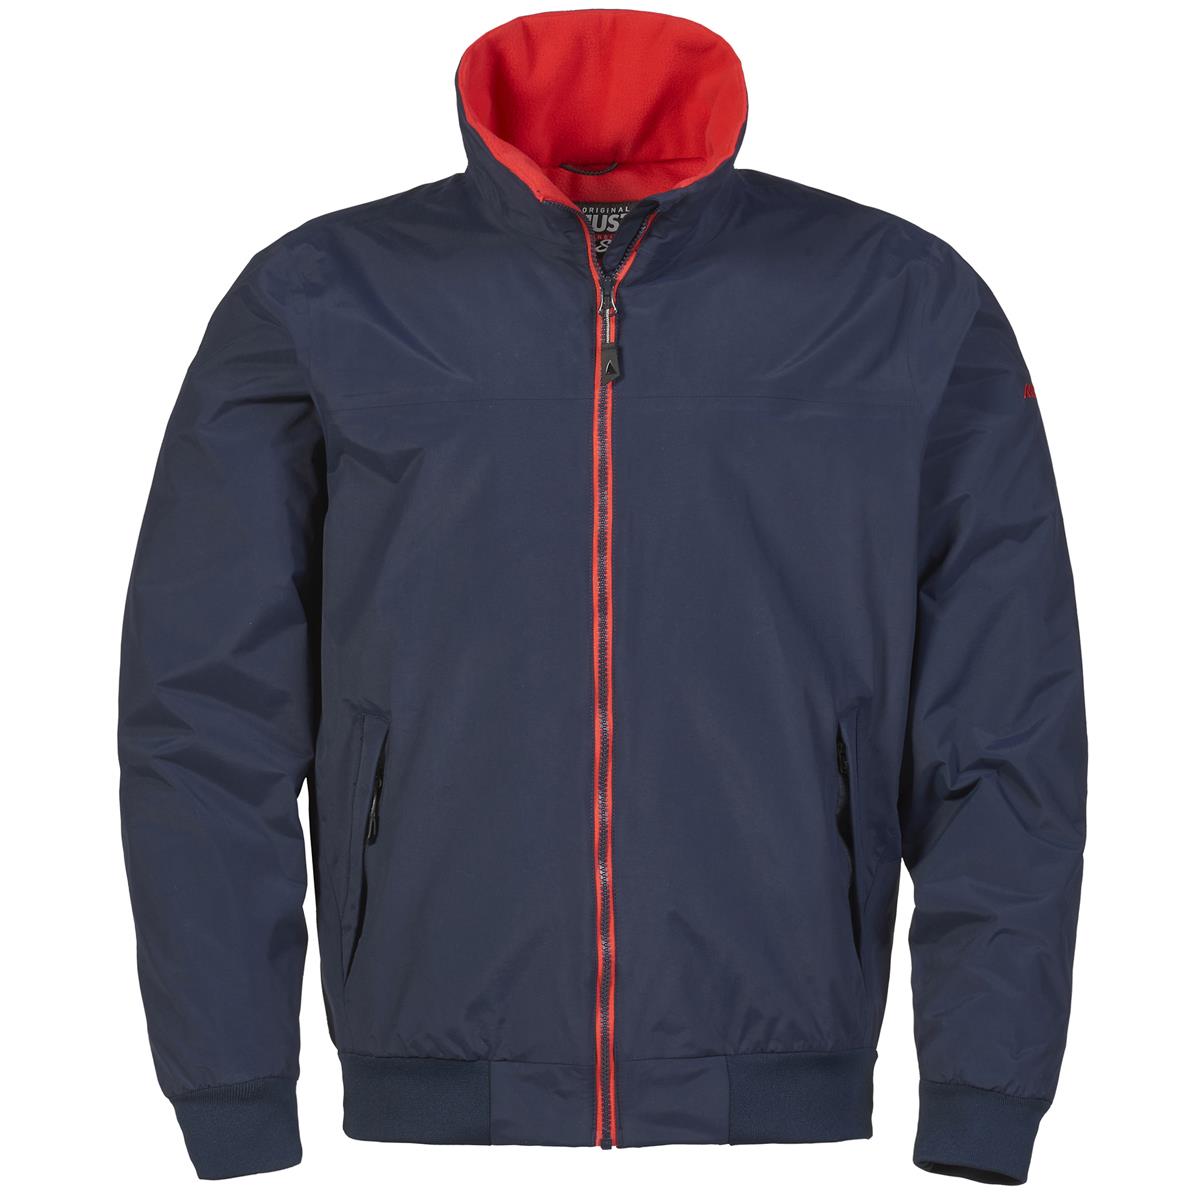 What makes the Musto Snug Blouson Jacket 2.0 the perfect choice for men?